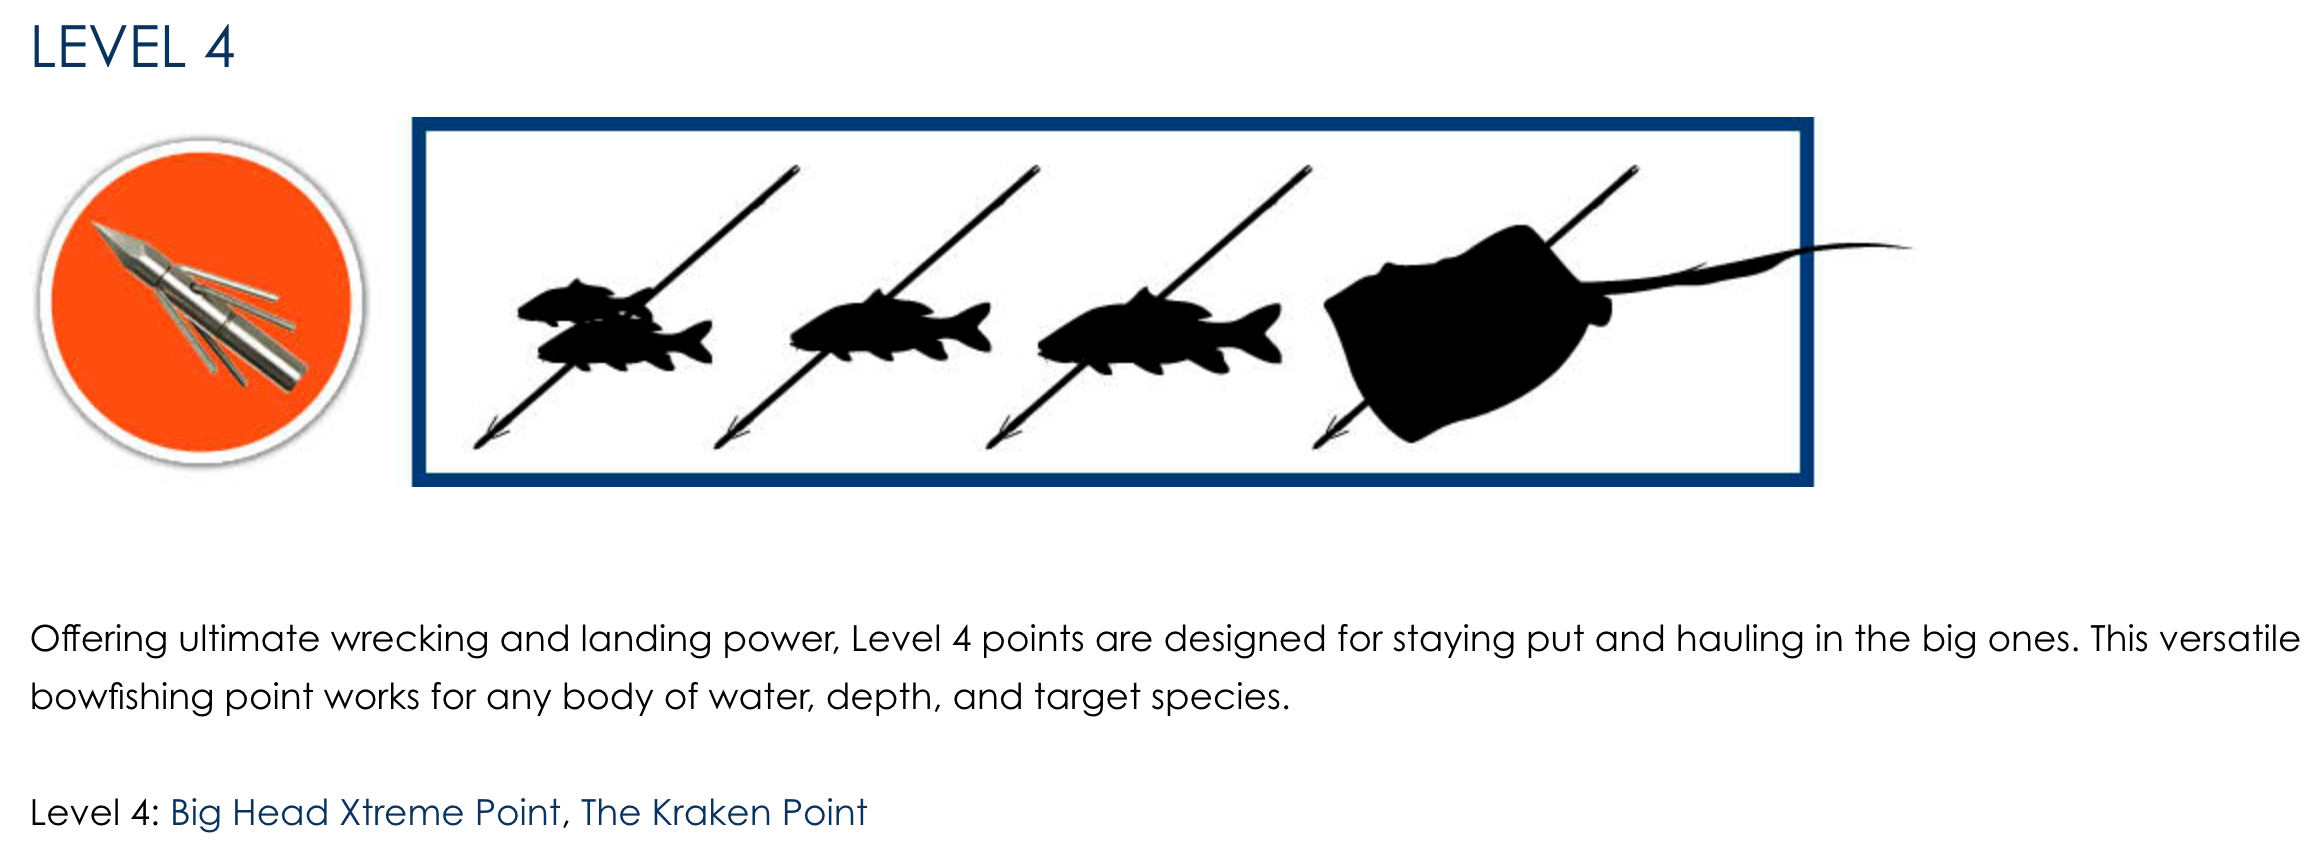 How to Choose the Right Bowfishing Point